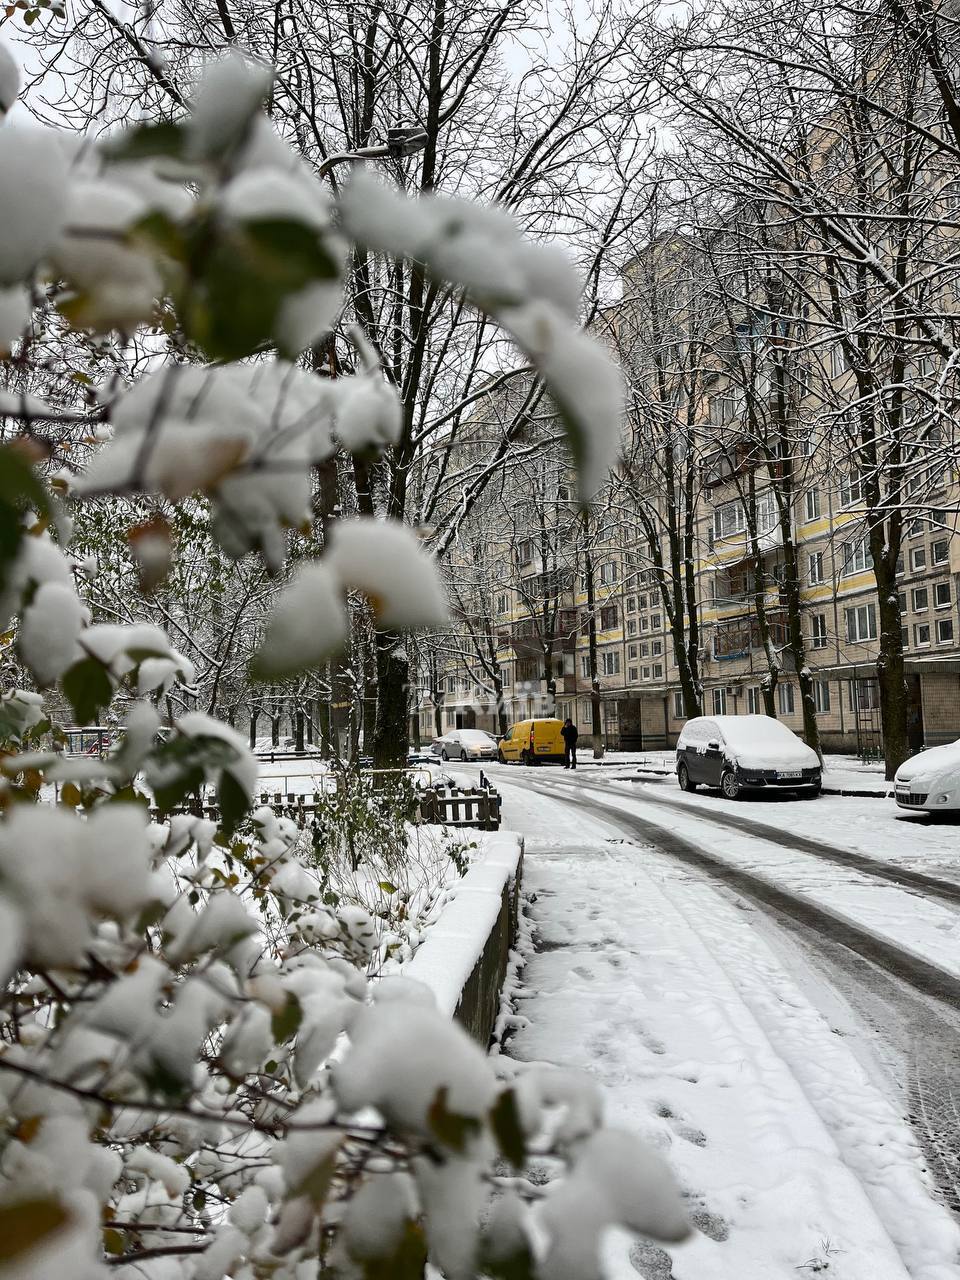 Real winter comes to Kyiv: roads covered with snow, drivers warned of ice. Photo and video